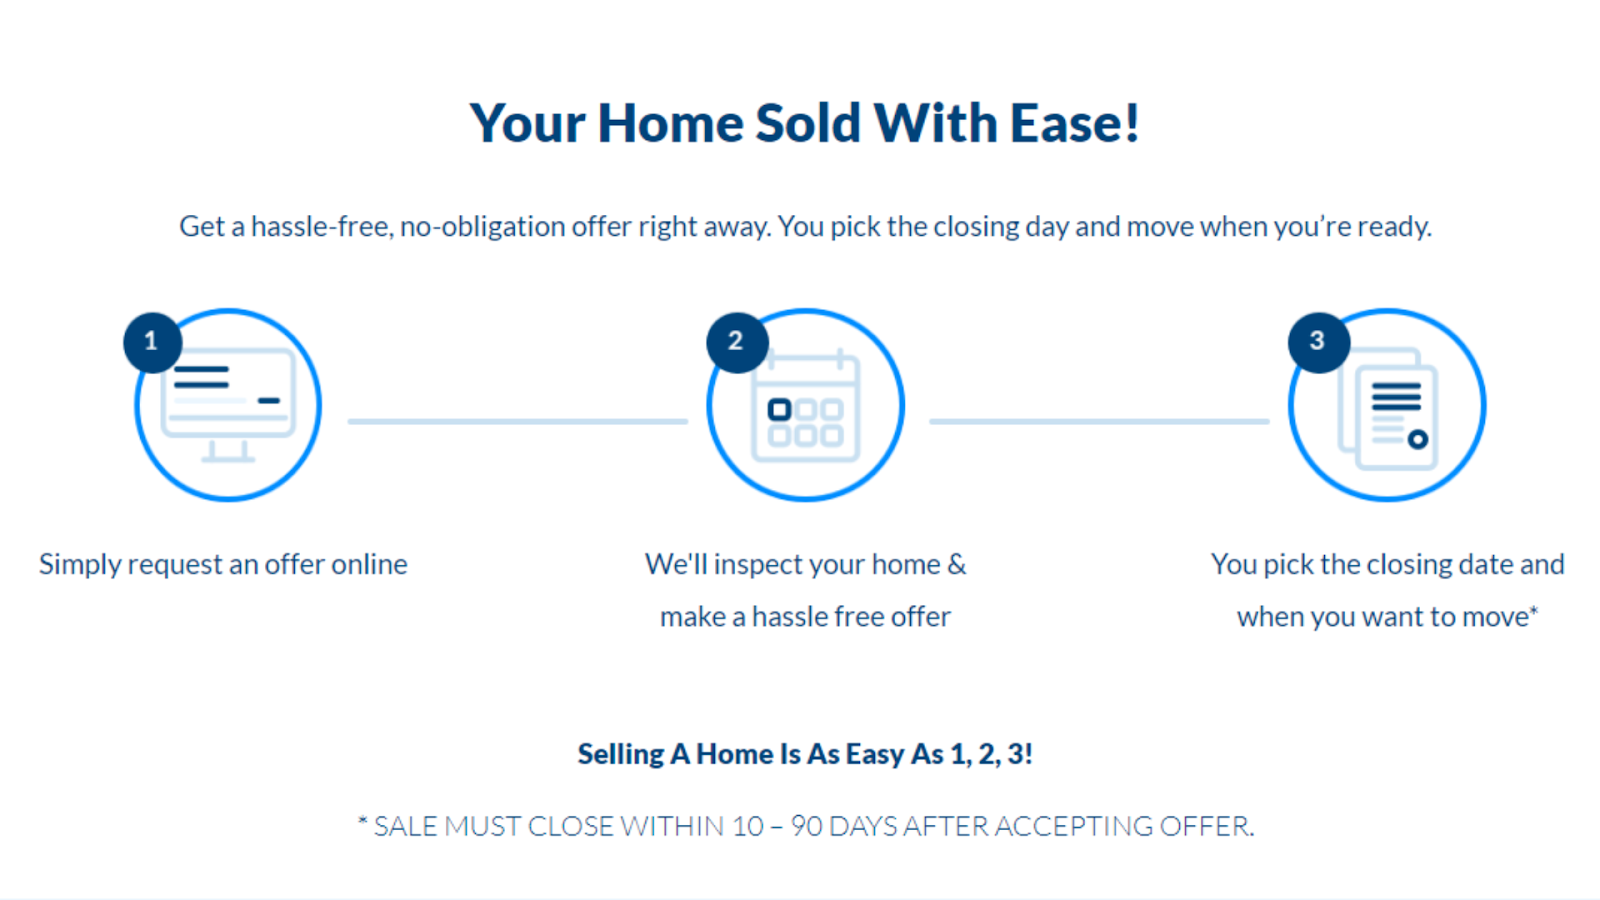 Your Home Sold With Ease!